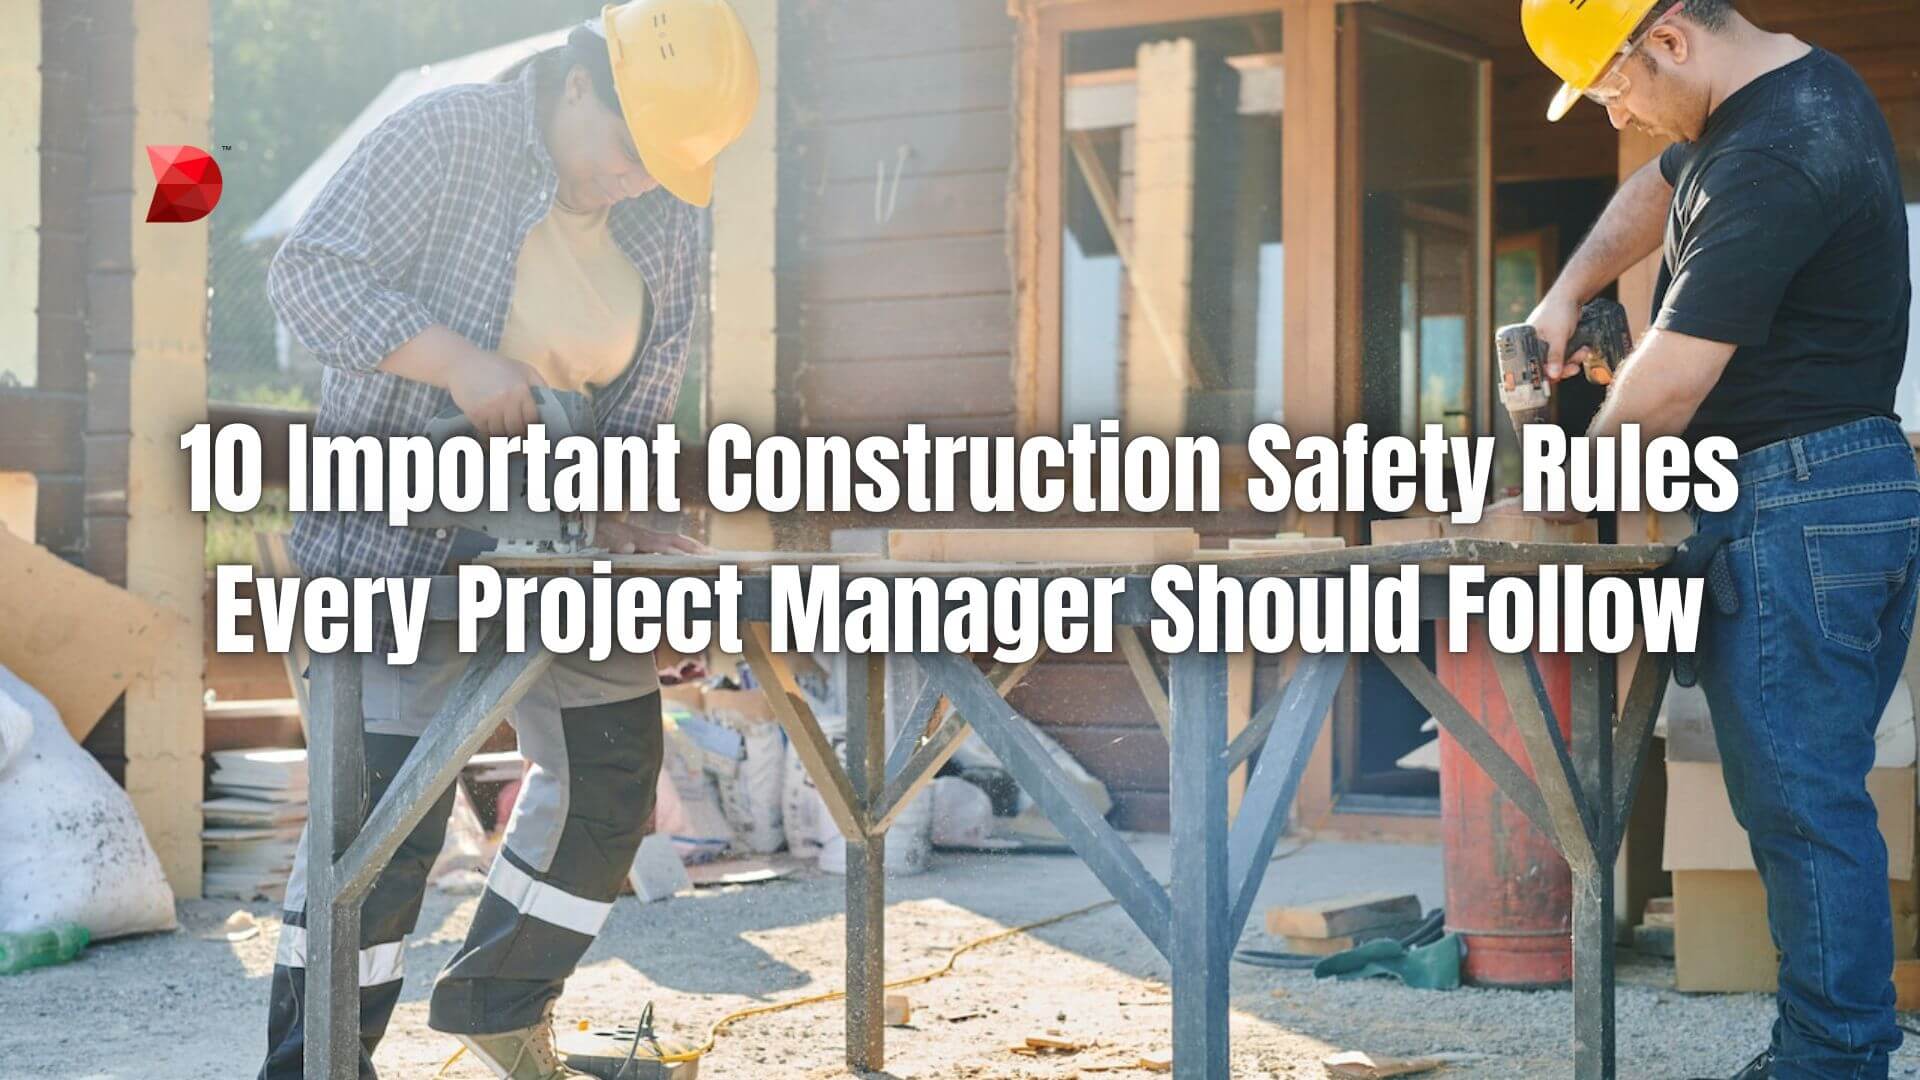 10 Important Construction Safety Rules Every Project Manager Should Follow